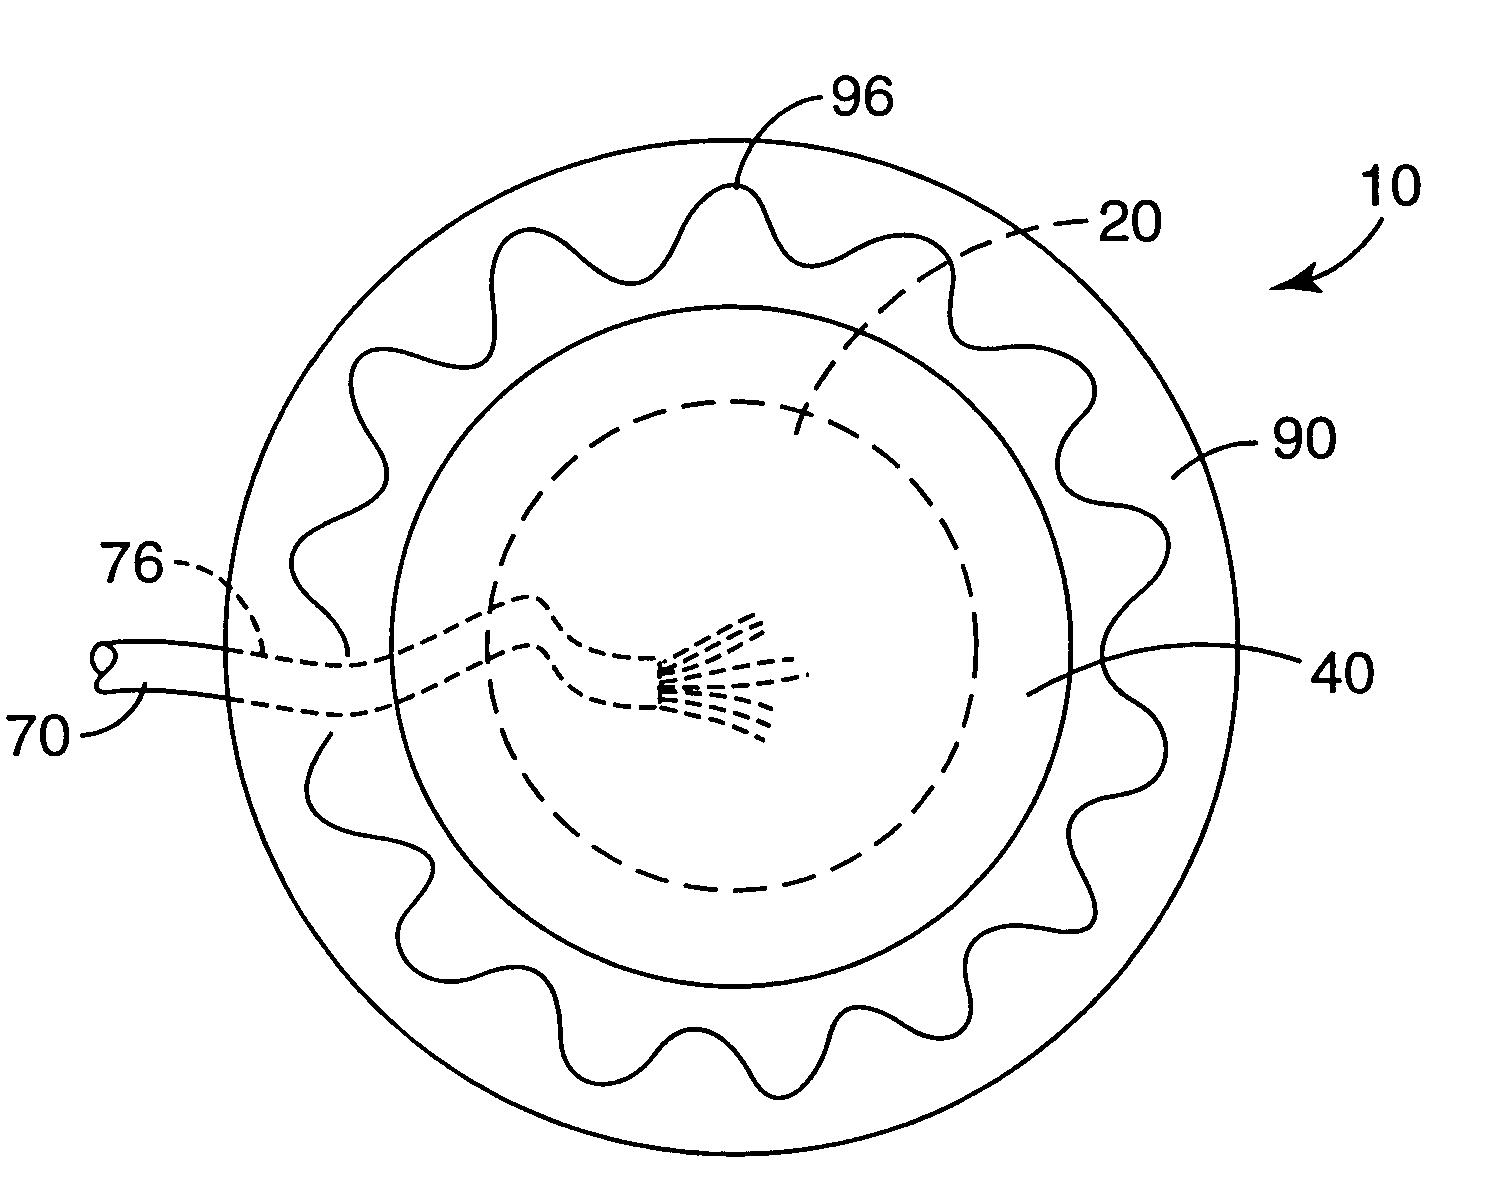 Biomedical electrode with current spreading layer